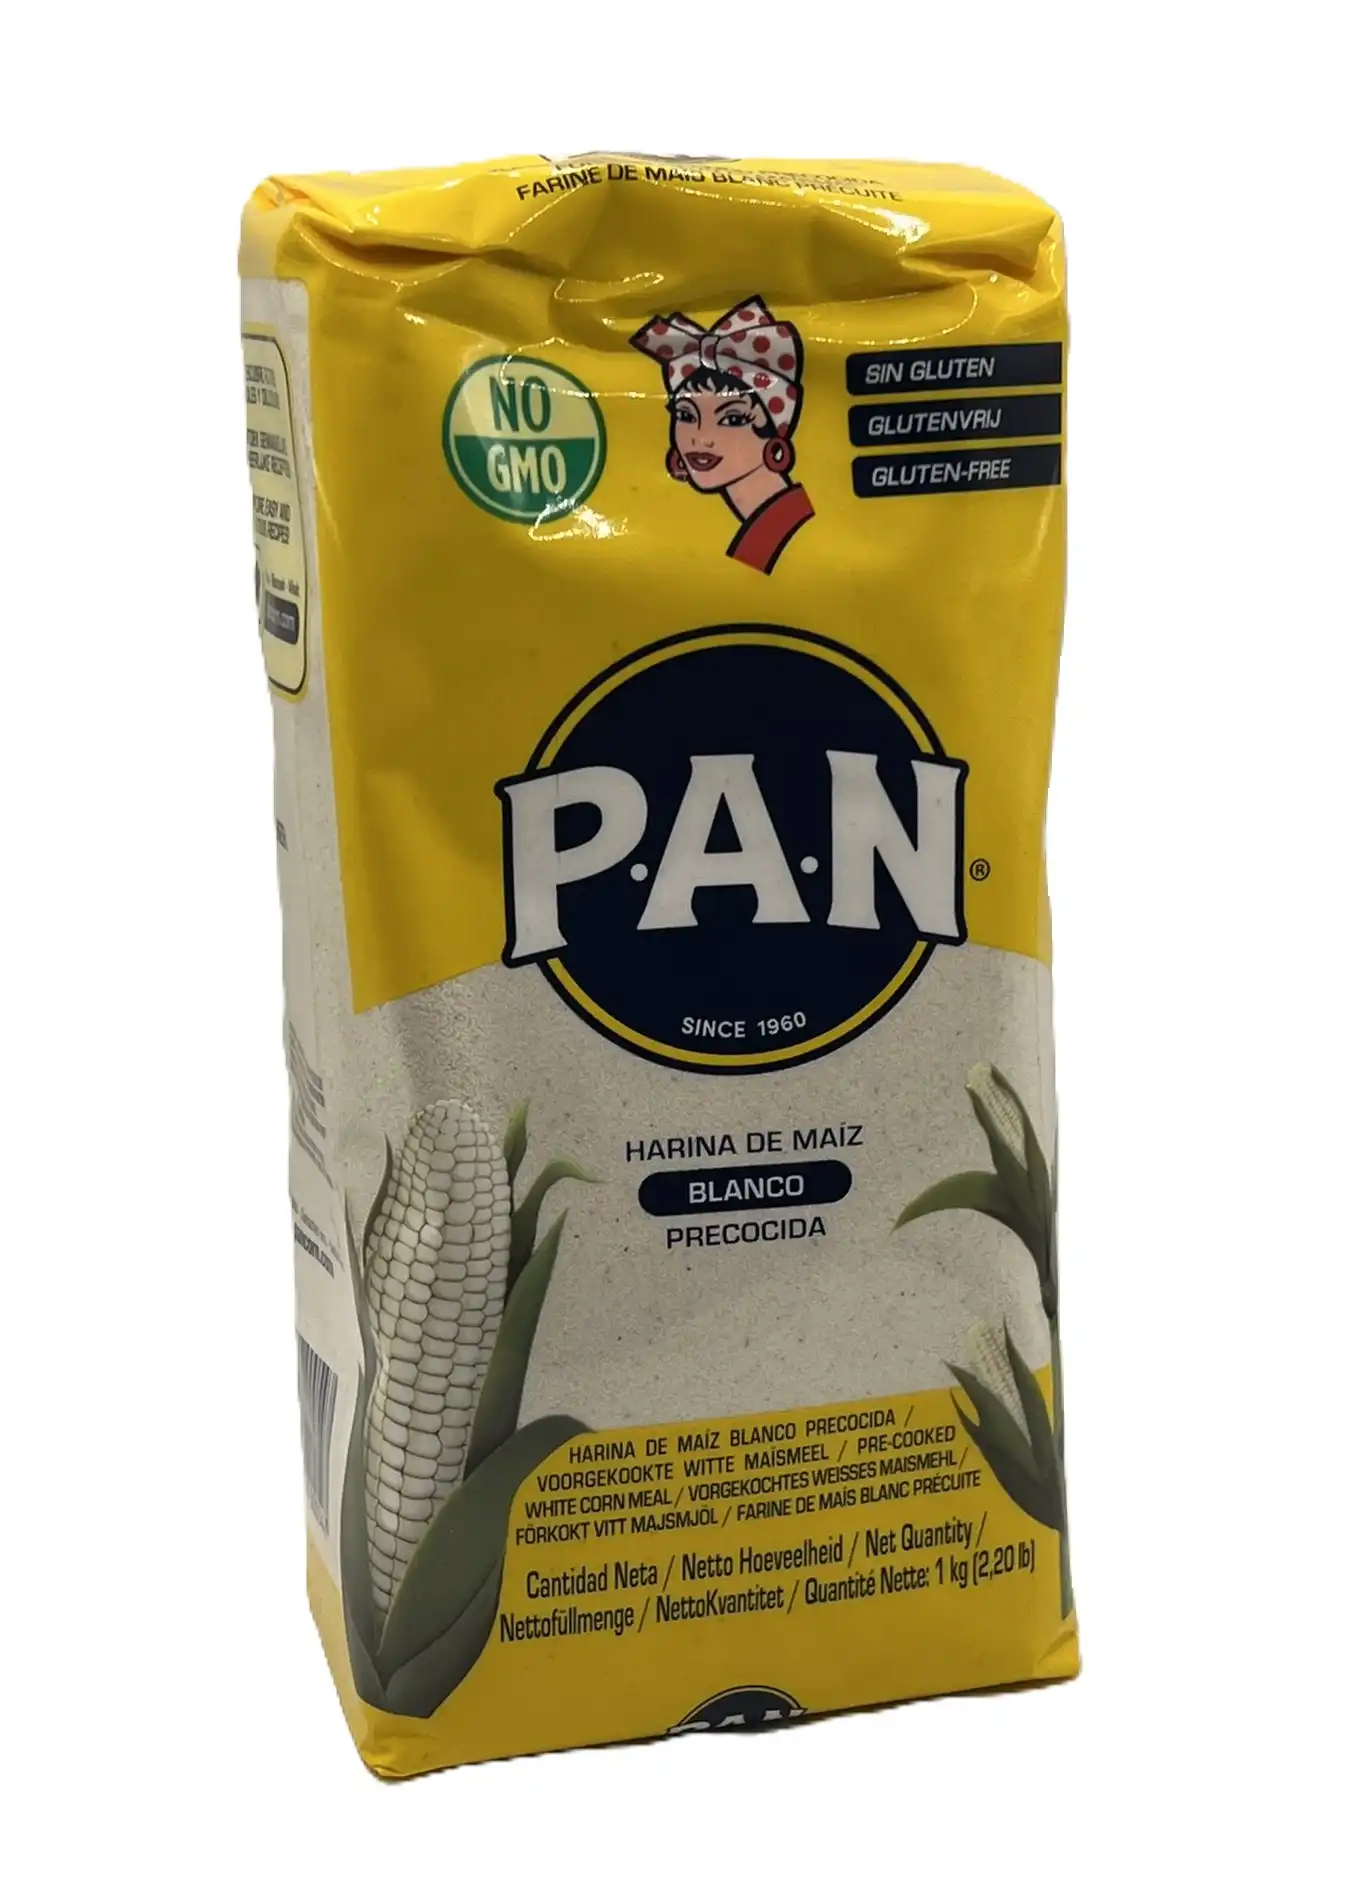 blanco (pre-cooked white corn meal)-P.A.N